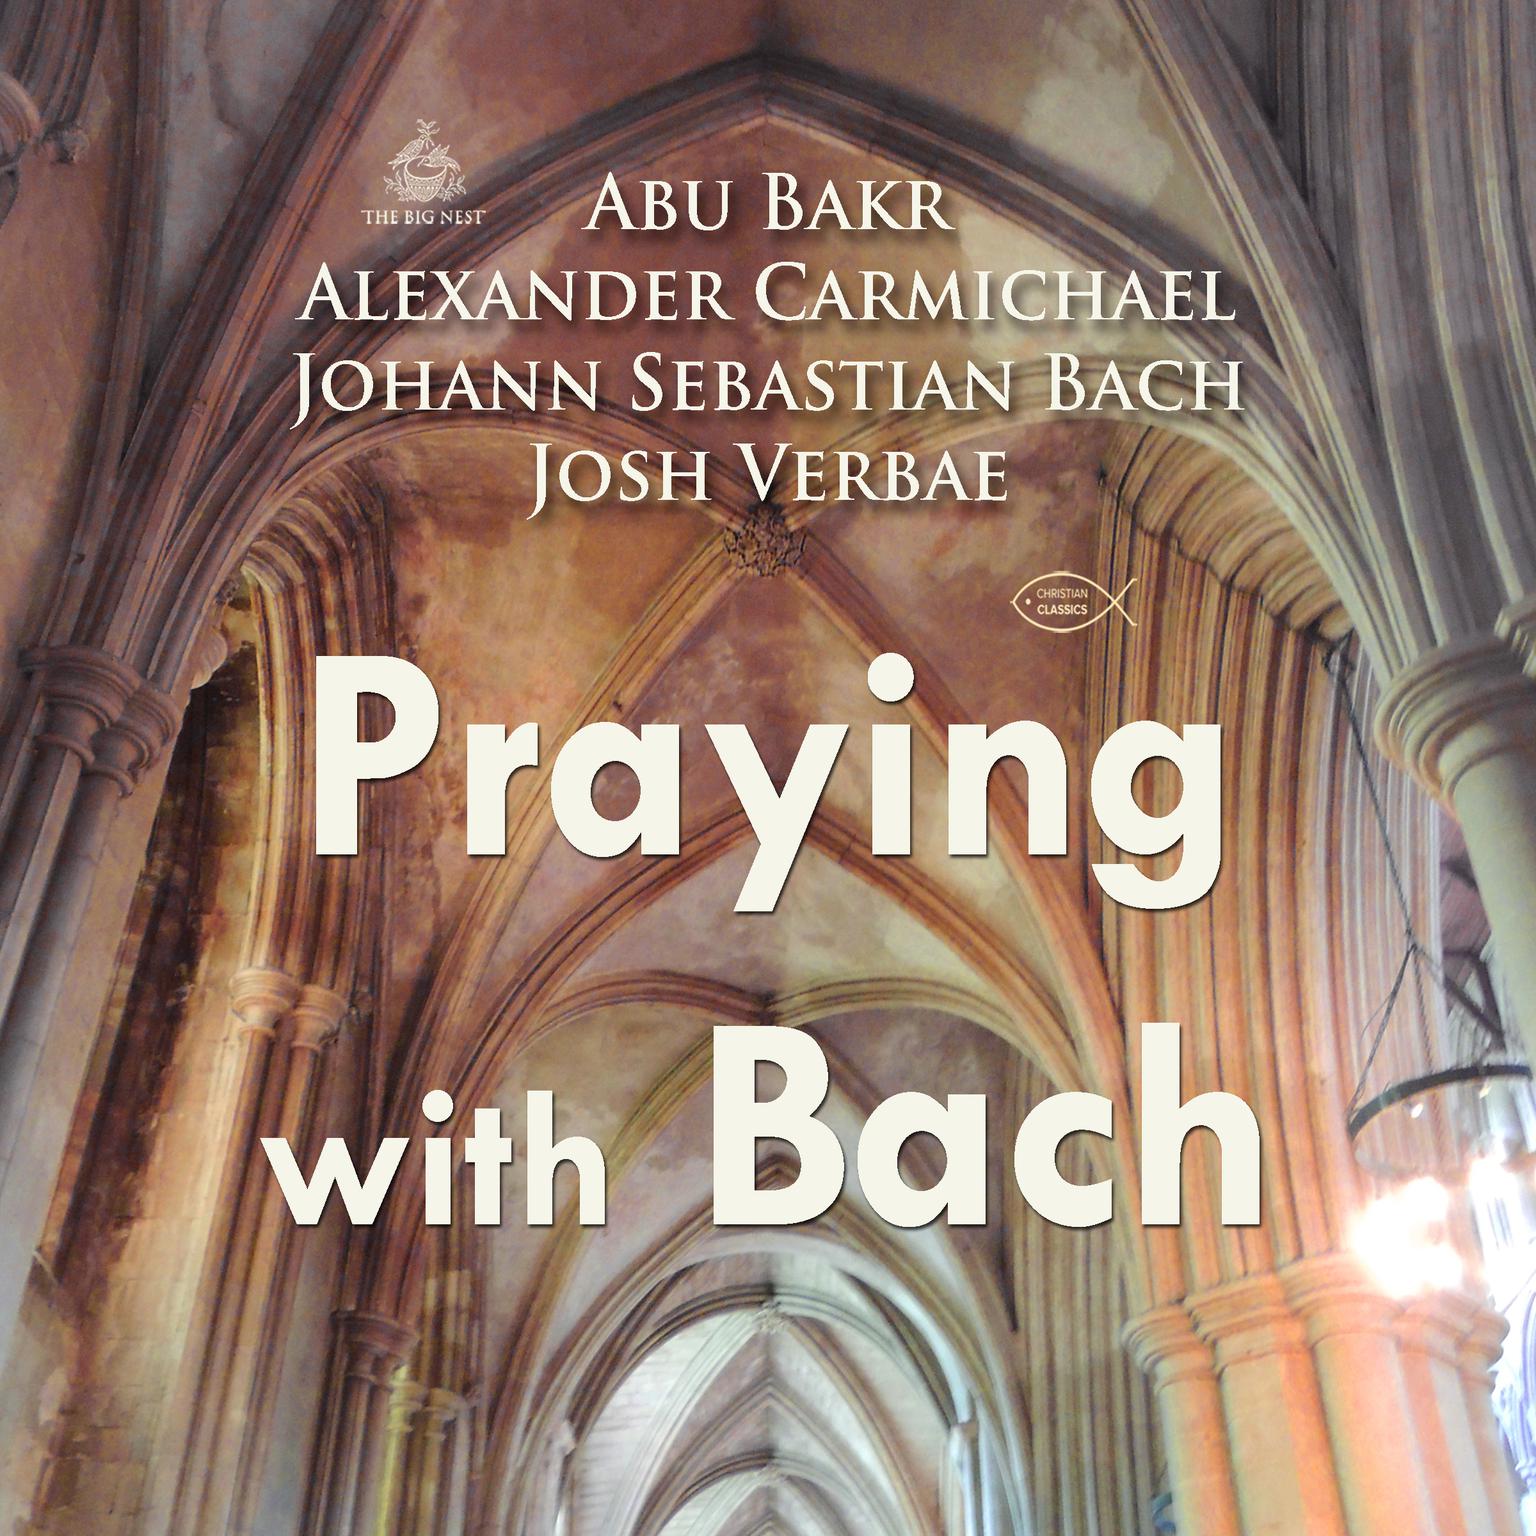 Praying with Bach Audiobook, by Abu Bakr